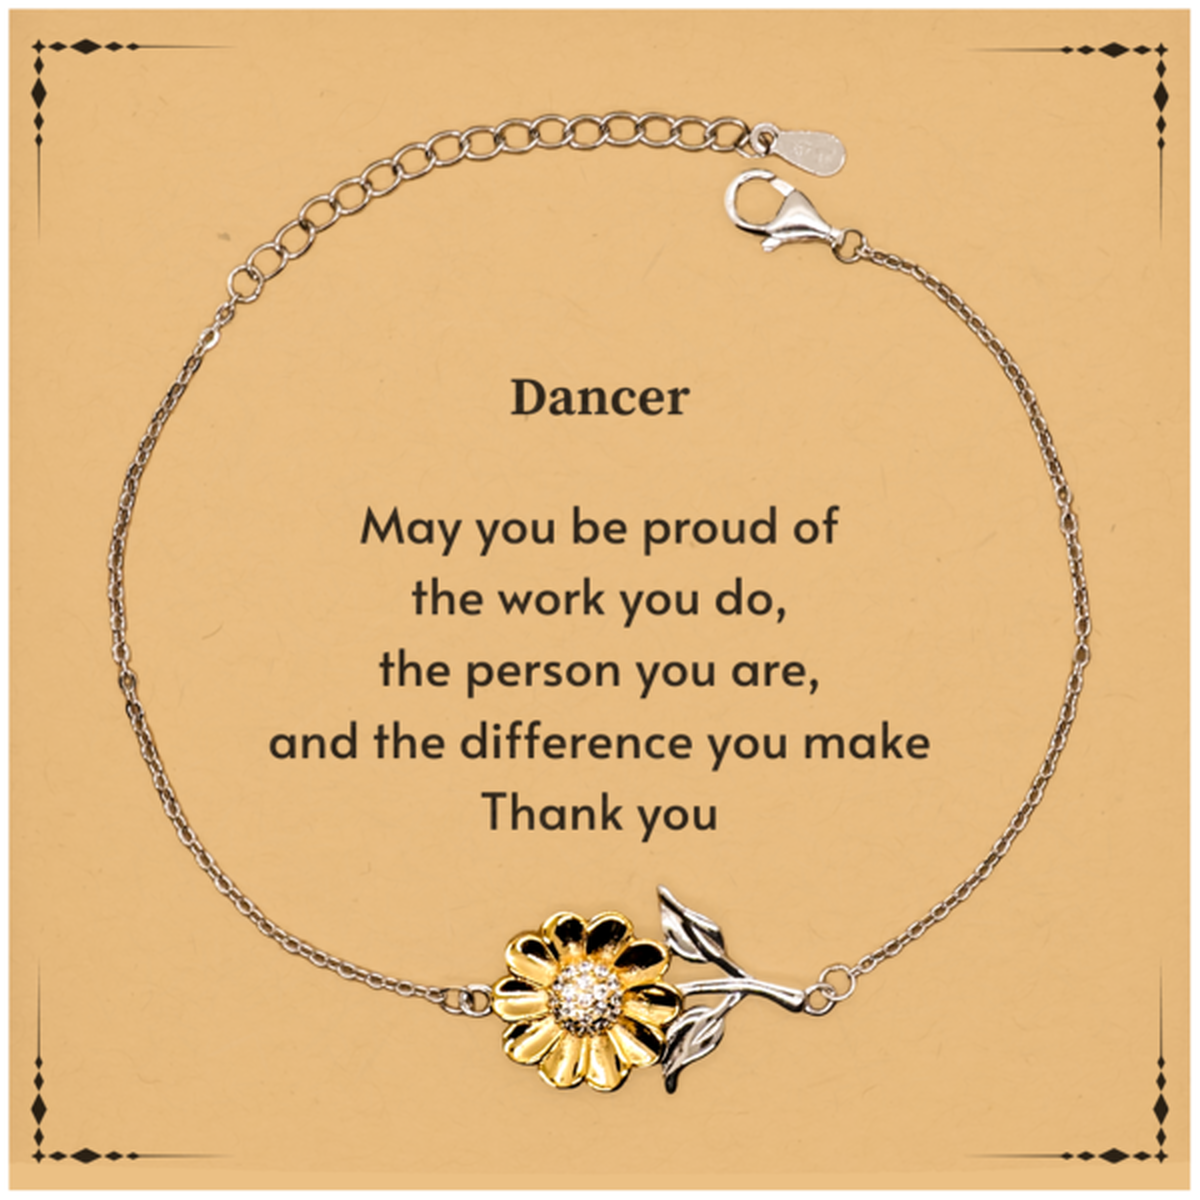 Heartwarming Sunflower Bracelet Retirement Coworkers Gifts for Dancer, Dancer May You be proud of the work you do, the person you are Gifts for Boss Men Women Friends